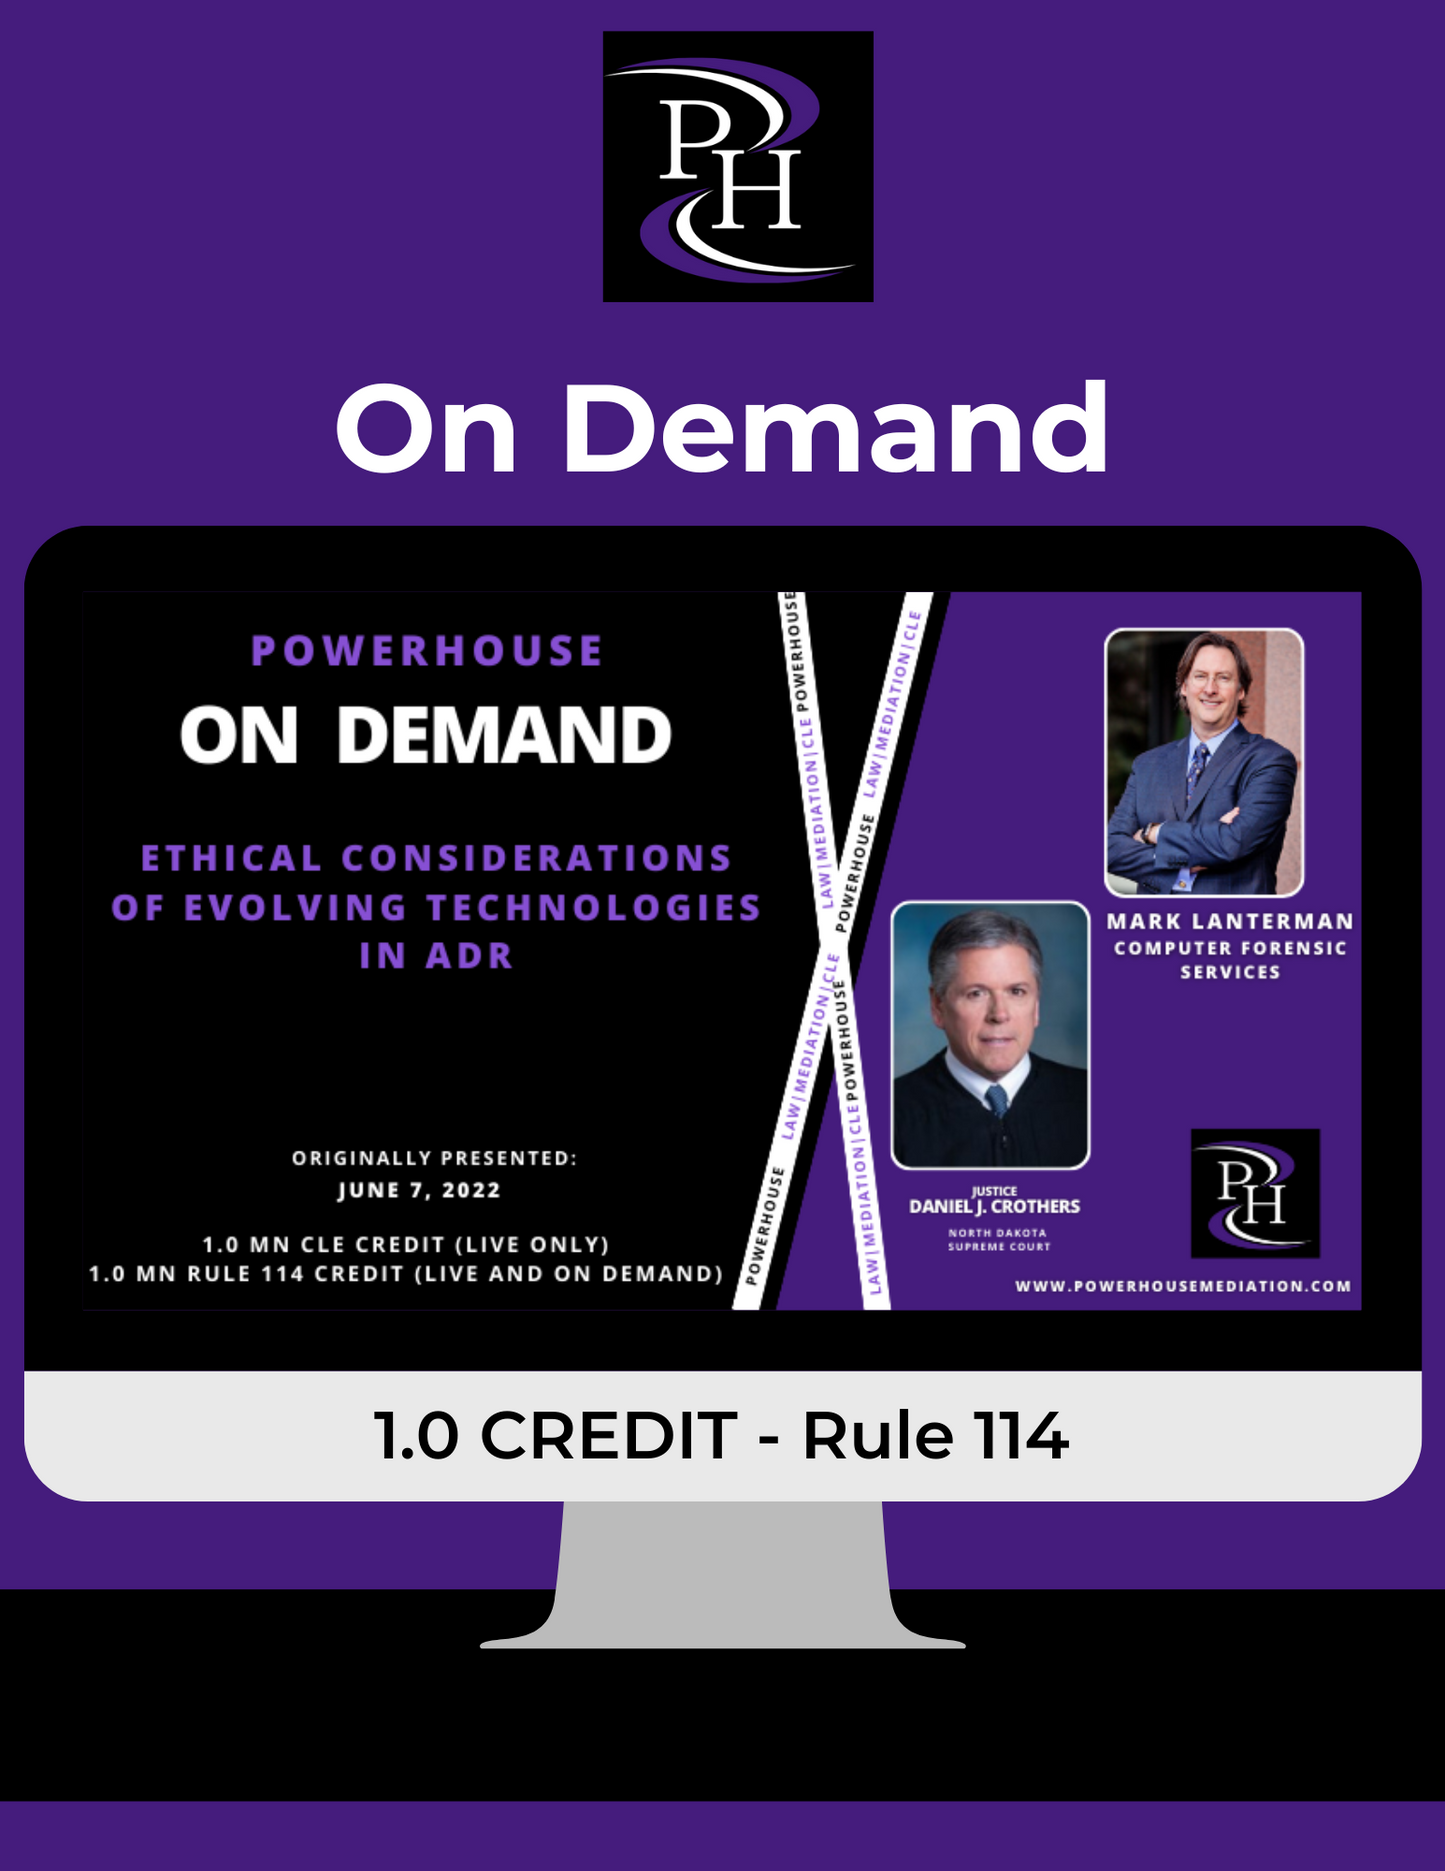 On Demand - Ethical Considerations of Evolving Technologies in ADR